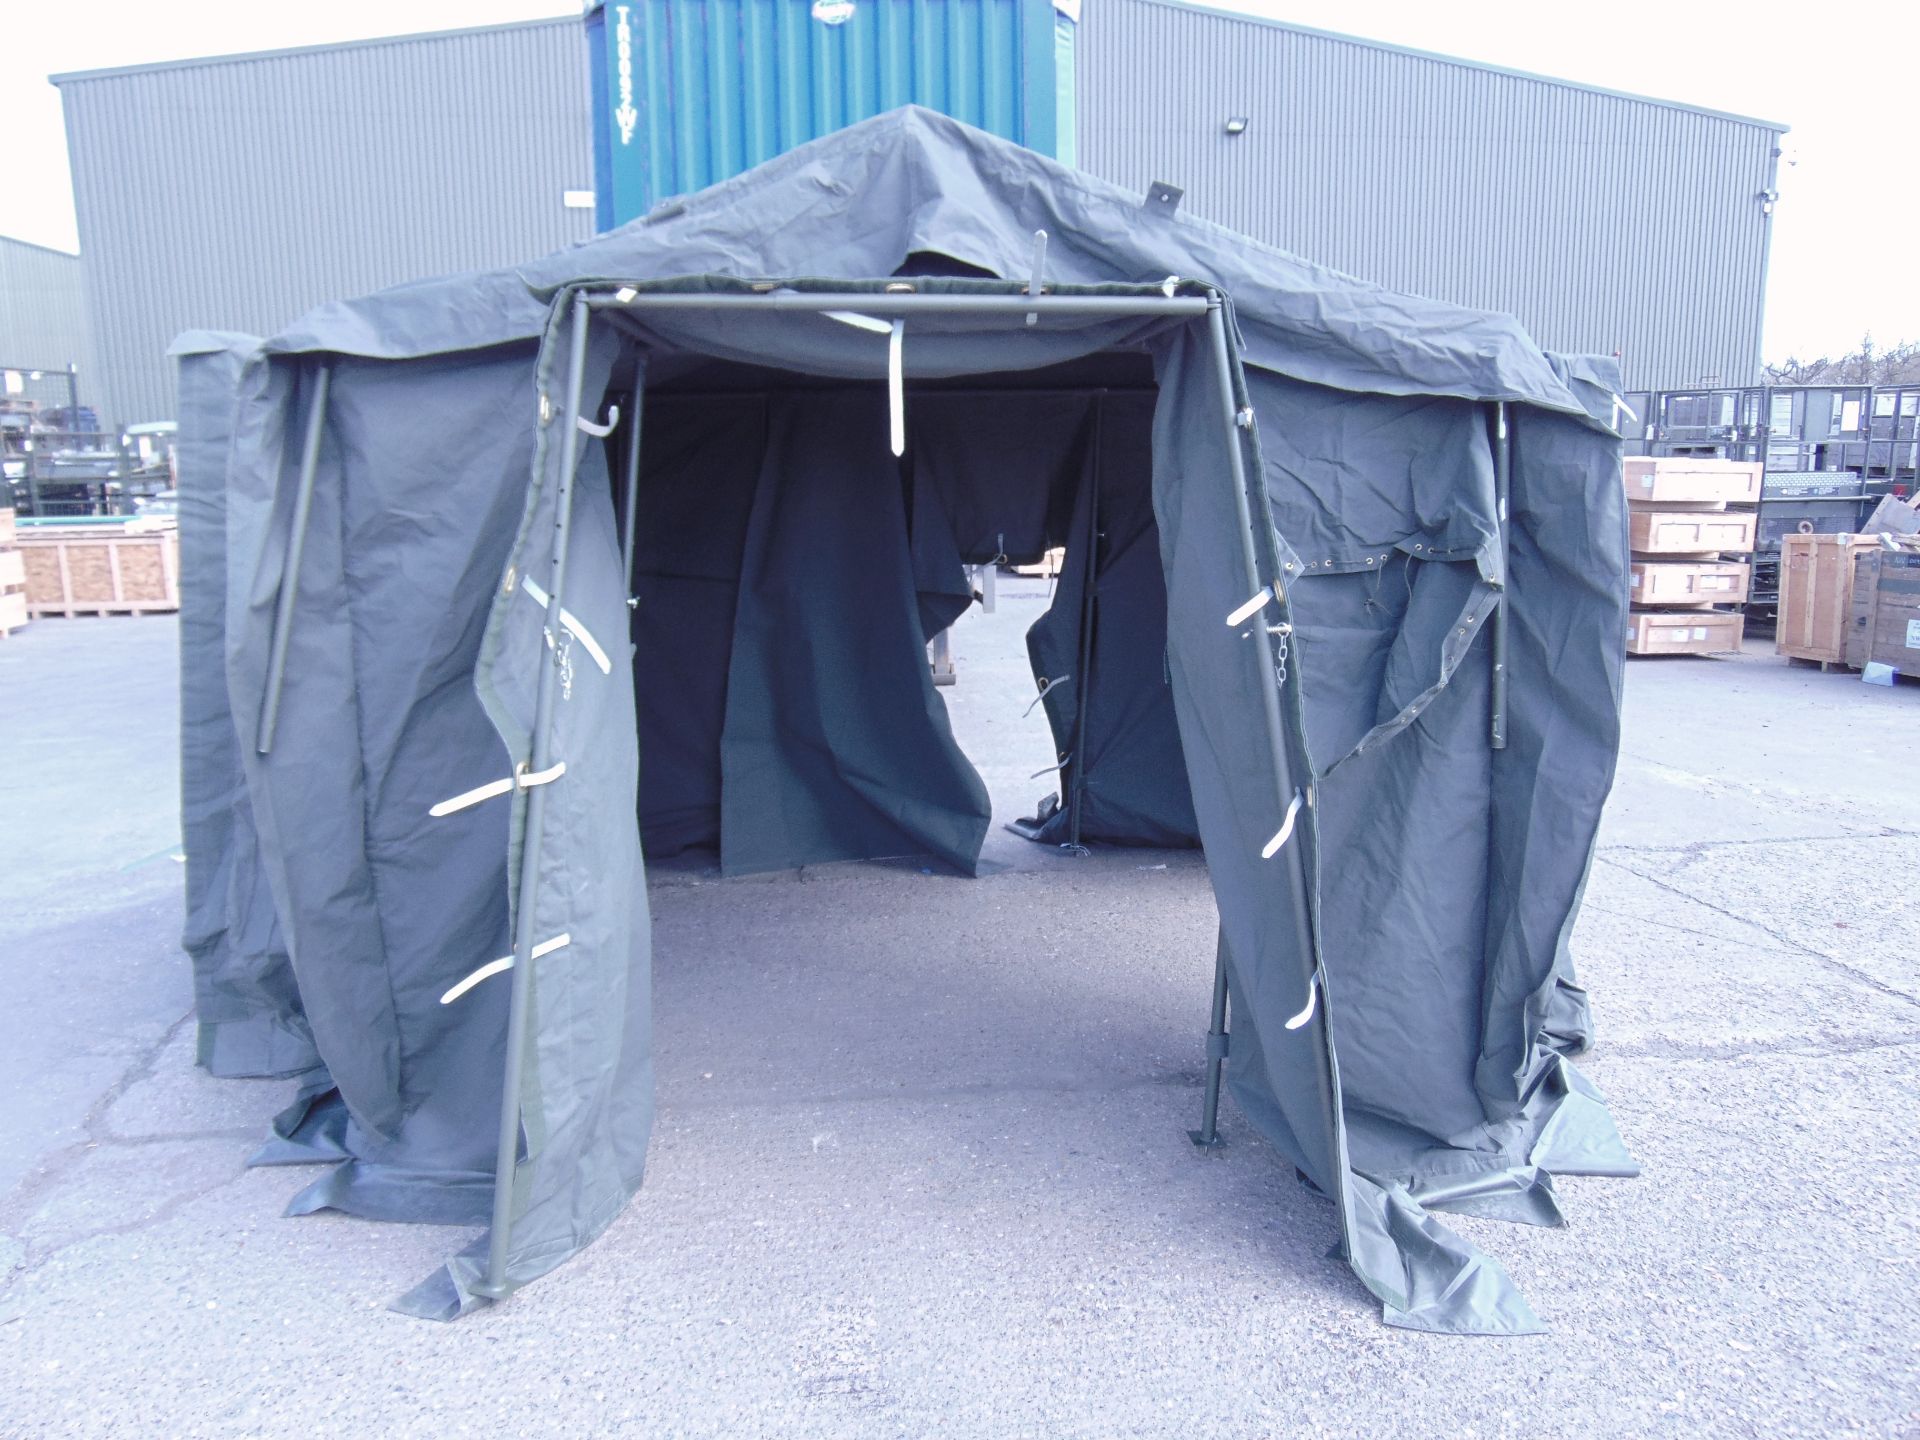 8'x8' Fv432 Closed Command/Sleeping Tent - Image 2 of 6